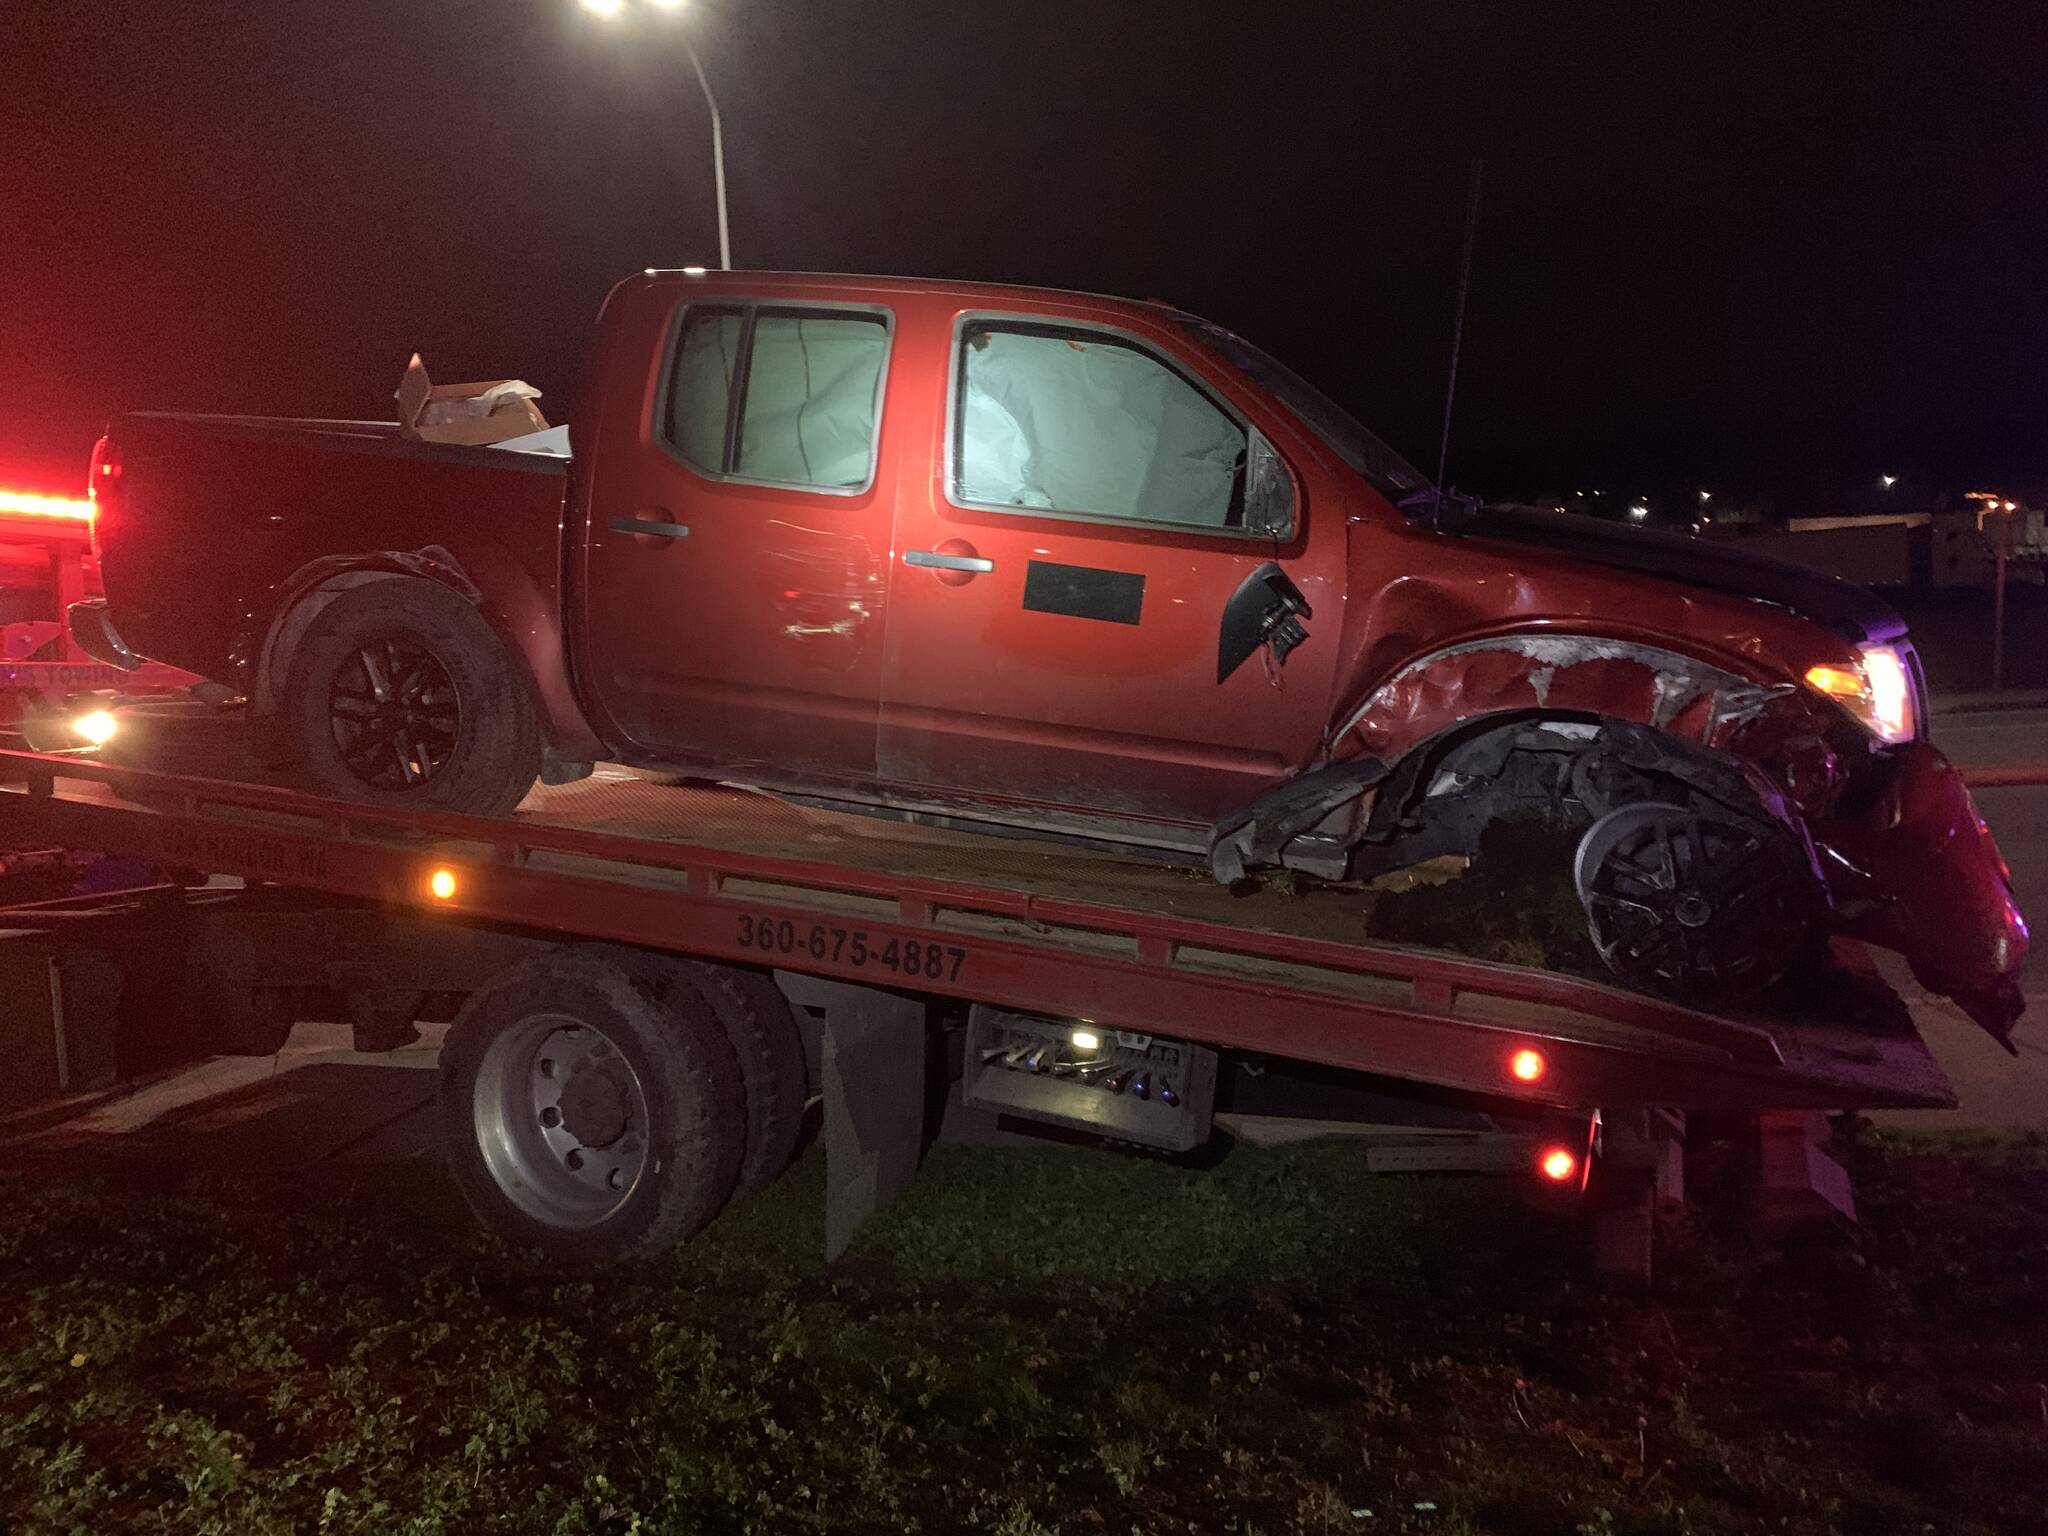 Oak Harbor Police photo A pickup involved in a high-speed chase in Oak Harbor Sunday night was damaged when the suspect crashed into a tree.